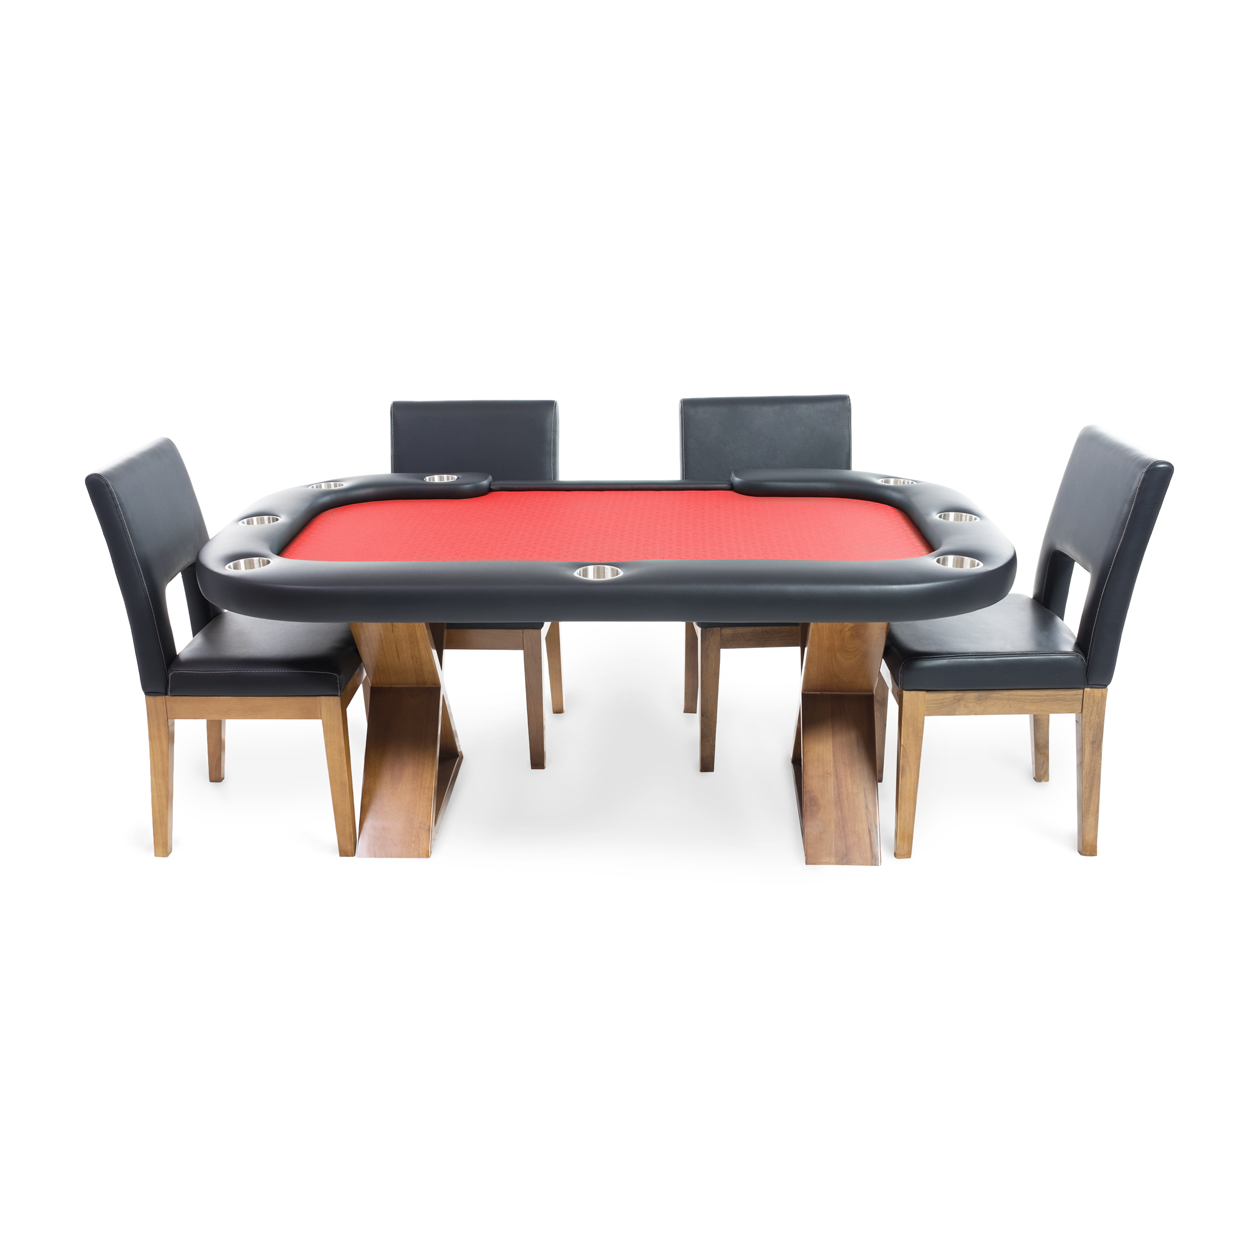 BBO Helmsley Poker Table Dealers Cut Red and Chairs